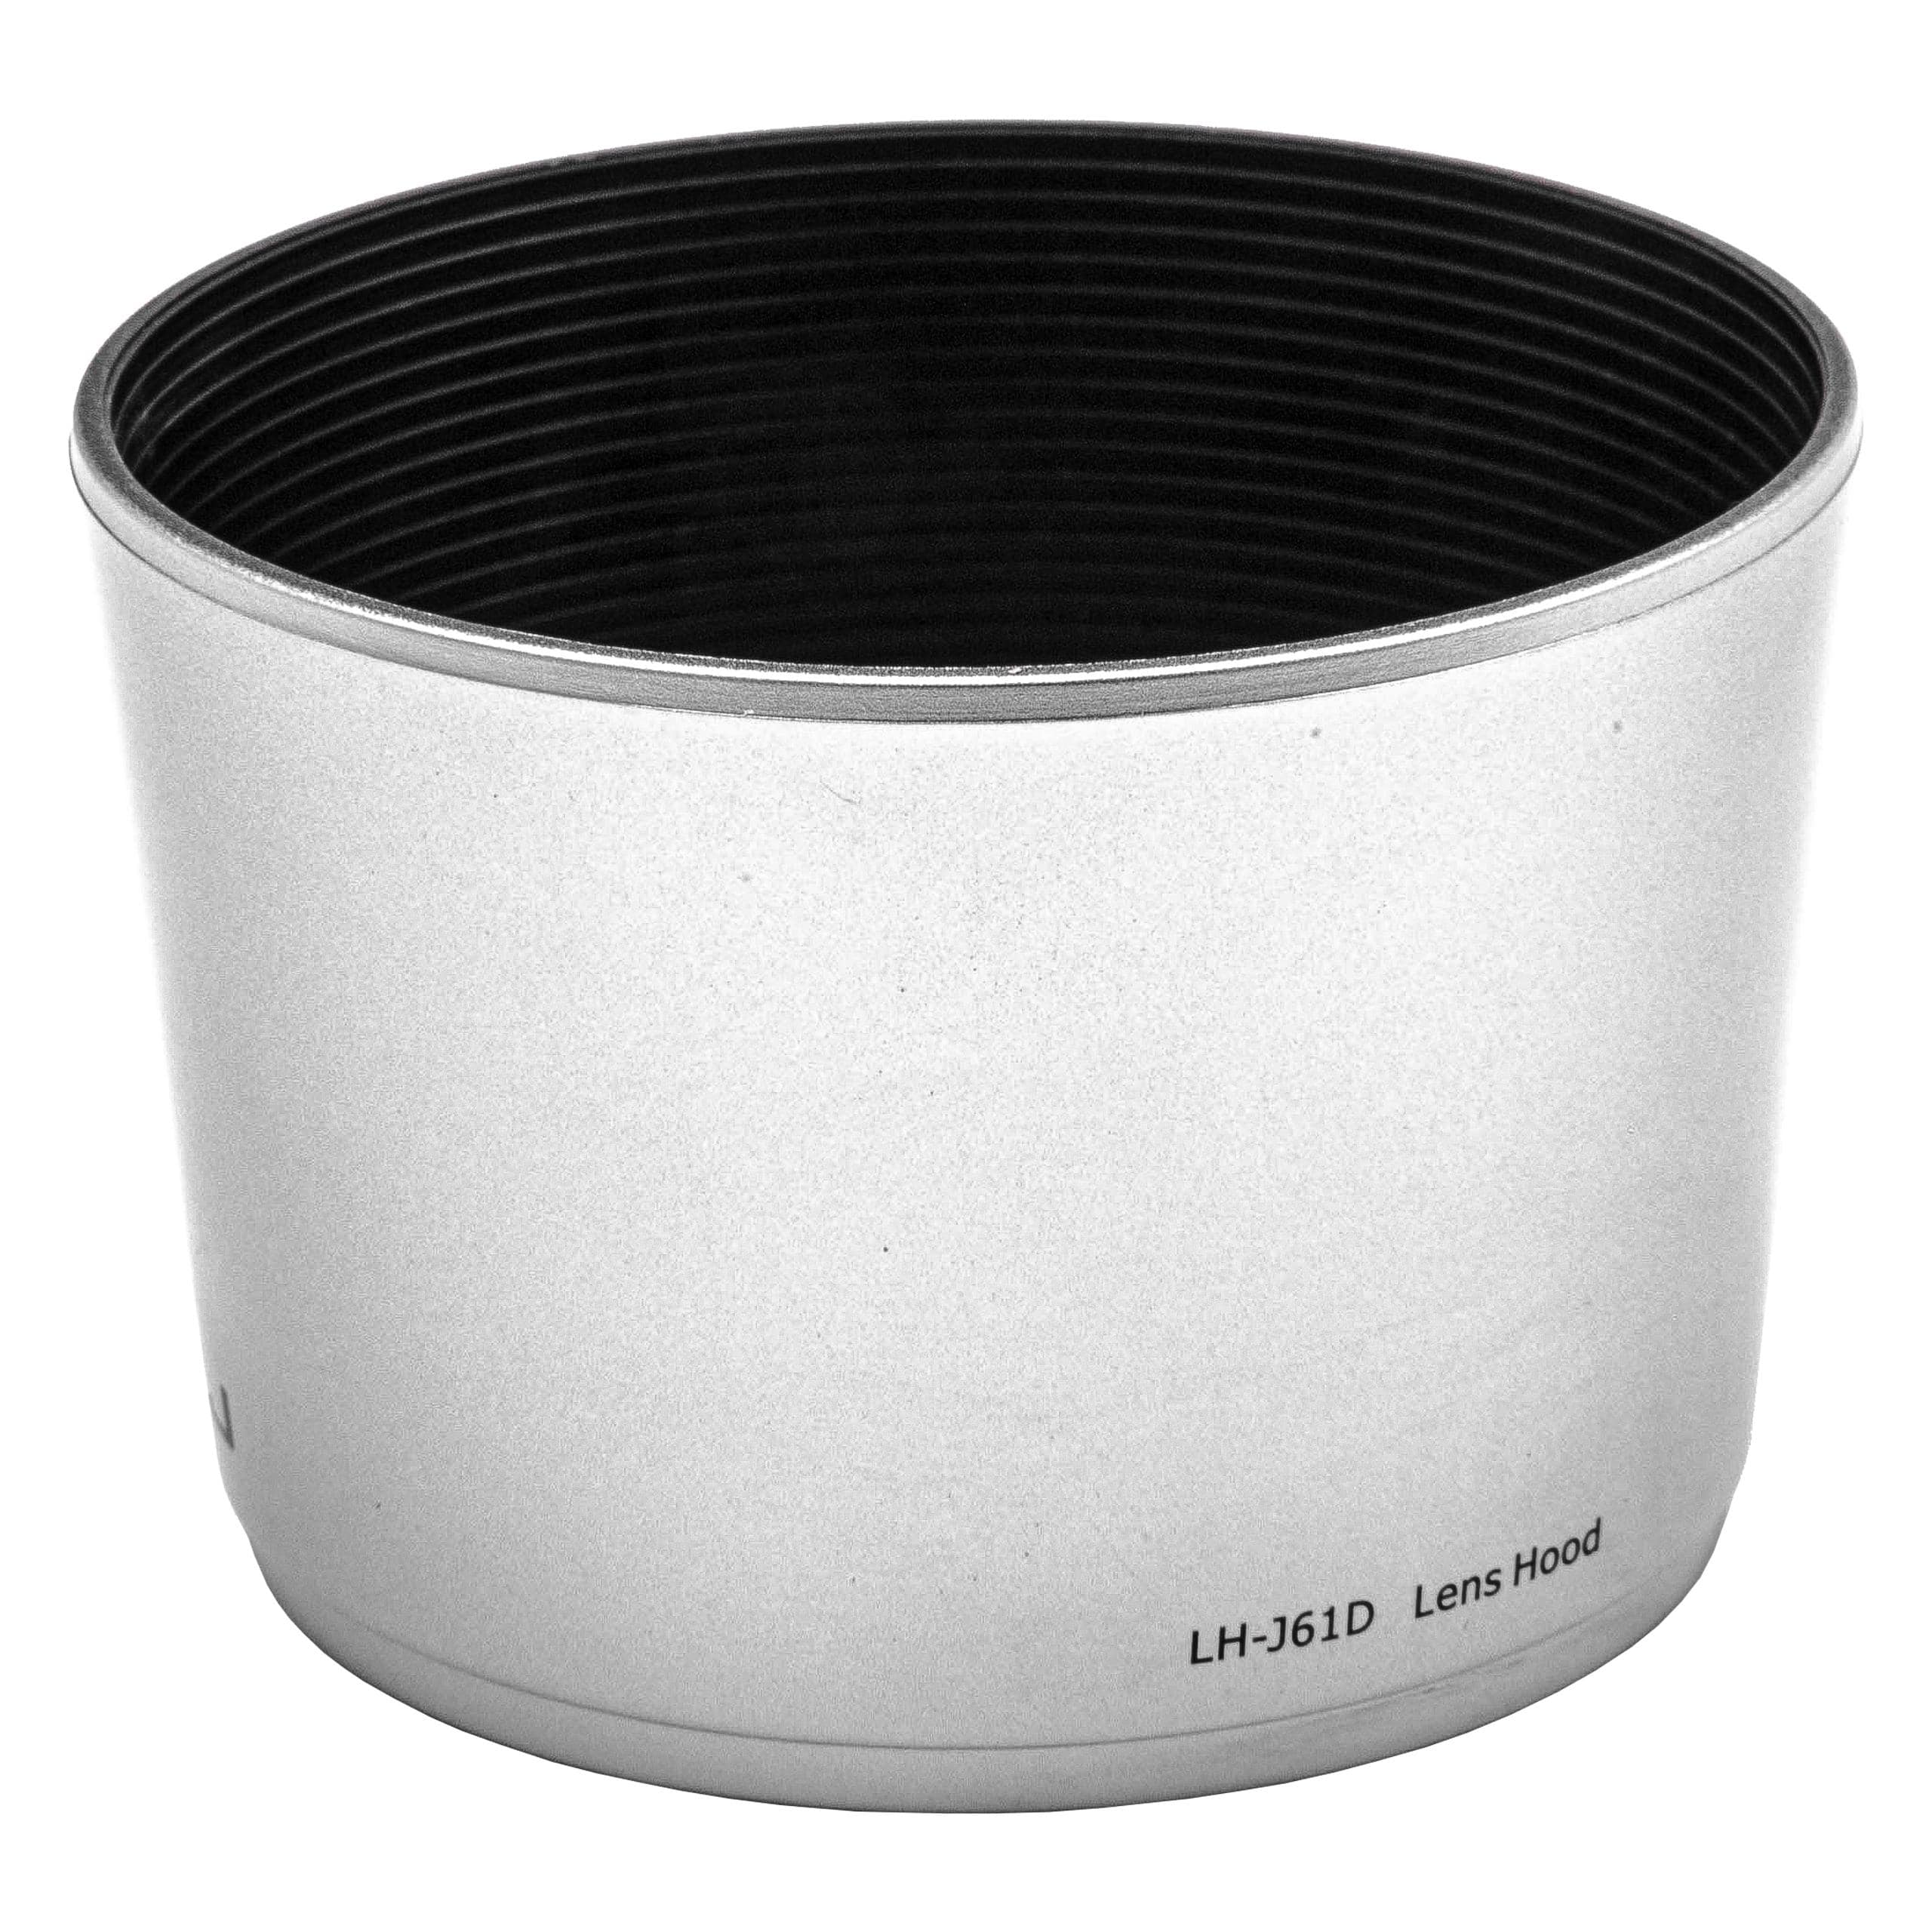 Lens Hood as Replacement for Olympus Lens LH-61D